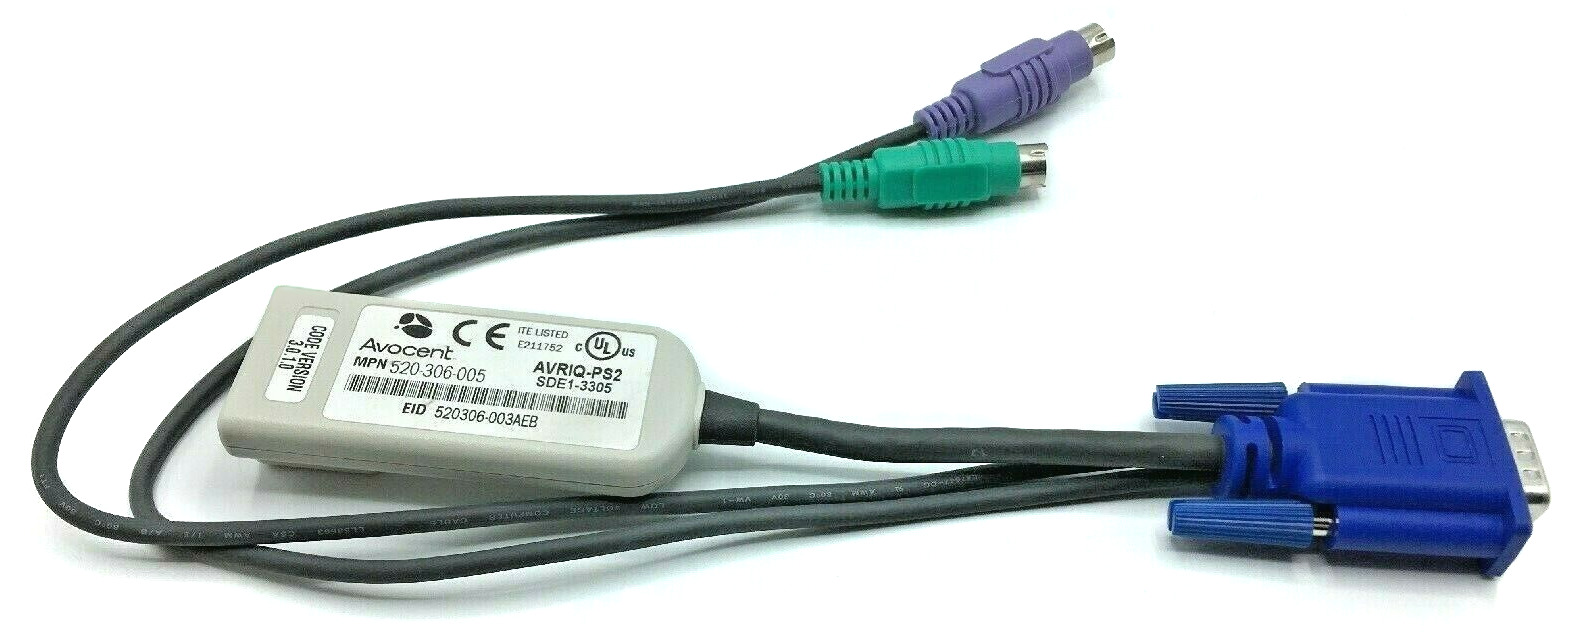 (3) AVOCENT 520-306-005 Vint. Computer Keyboard/Mouse/VGA/Ethernet Cable Adapter